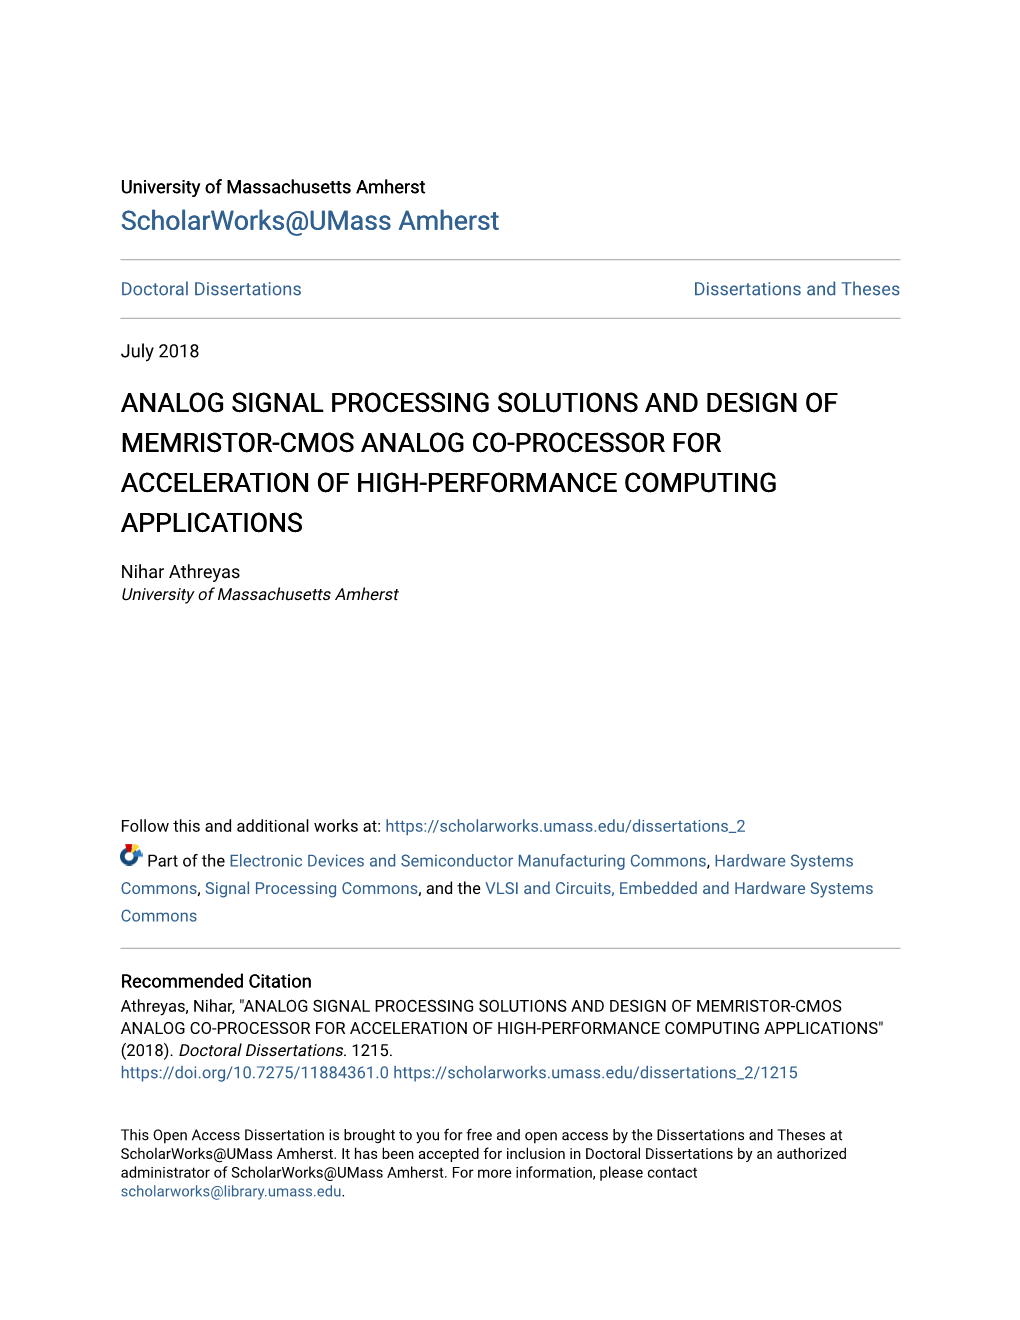 Analog Signal Processing Solutions and Design of Memristor-Cmos Analog Co-Processor for Acceleration of High-Performance Computing Applications